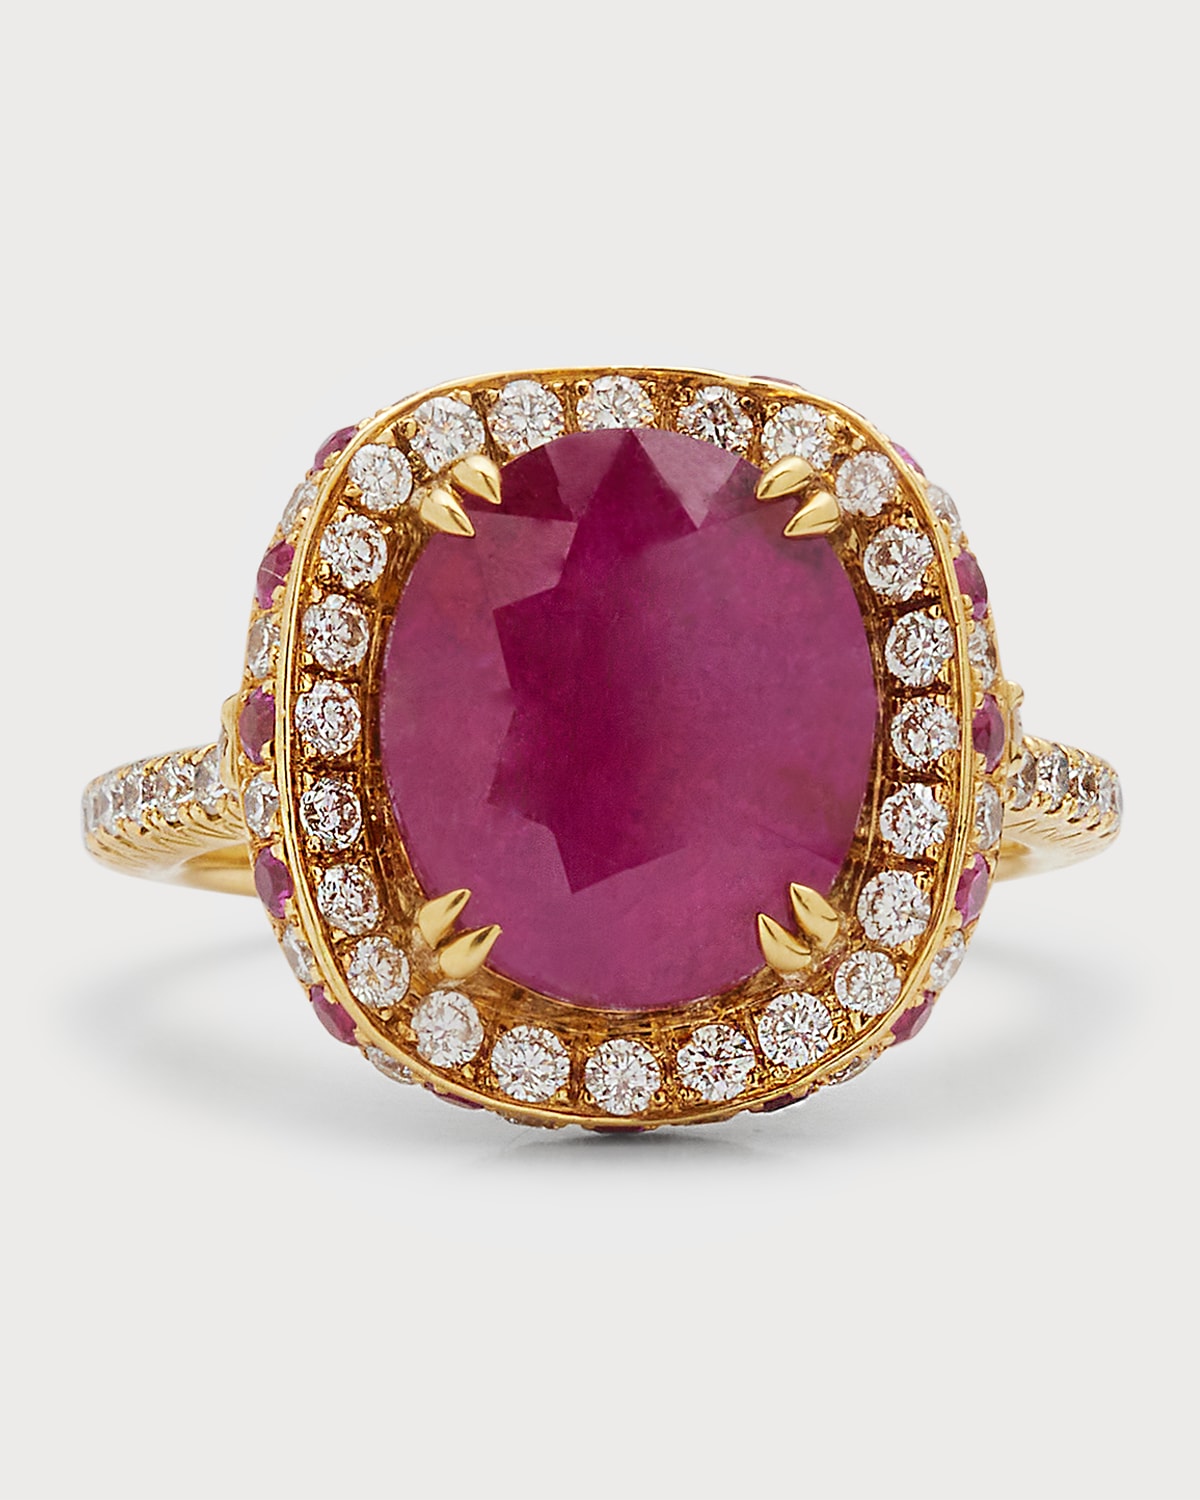 18K Ruby and Diamond Ring, Size 6.5